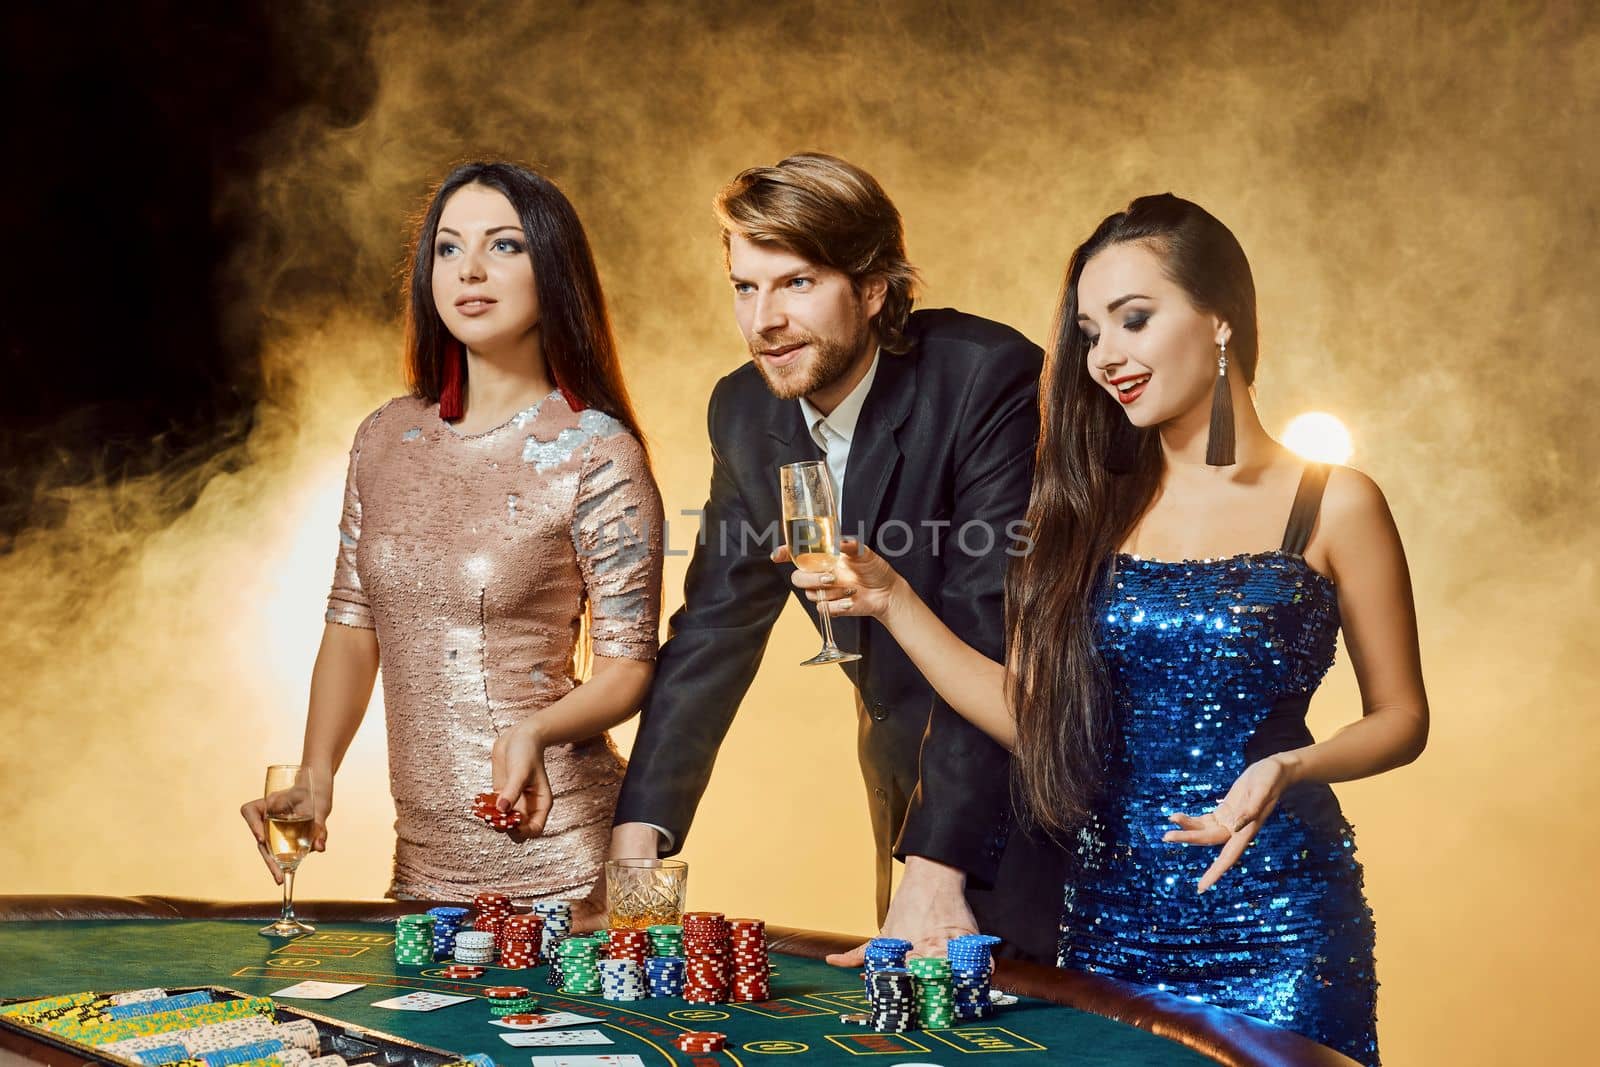 Two beautiful women and young man play on poker table in casino, focus on man and brunette. Passion, cards, chips, alcohol, dice, gambling, casino - it is entertainment. Dangerous fun card game for money. Smoke background.